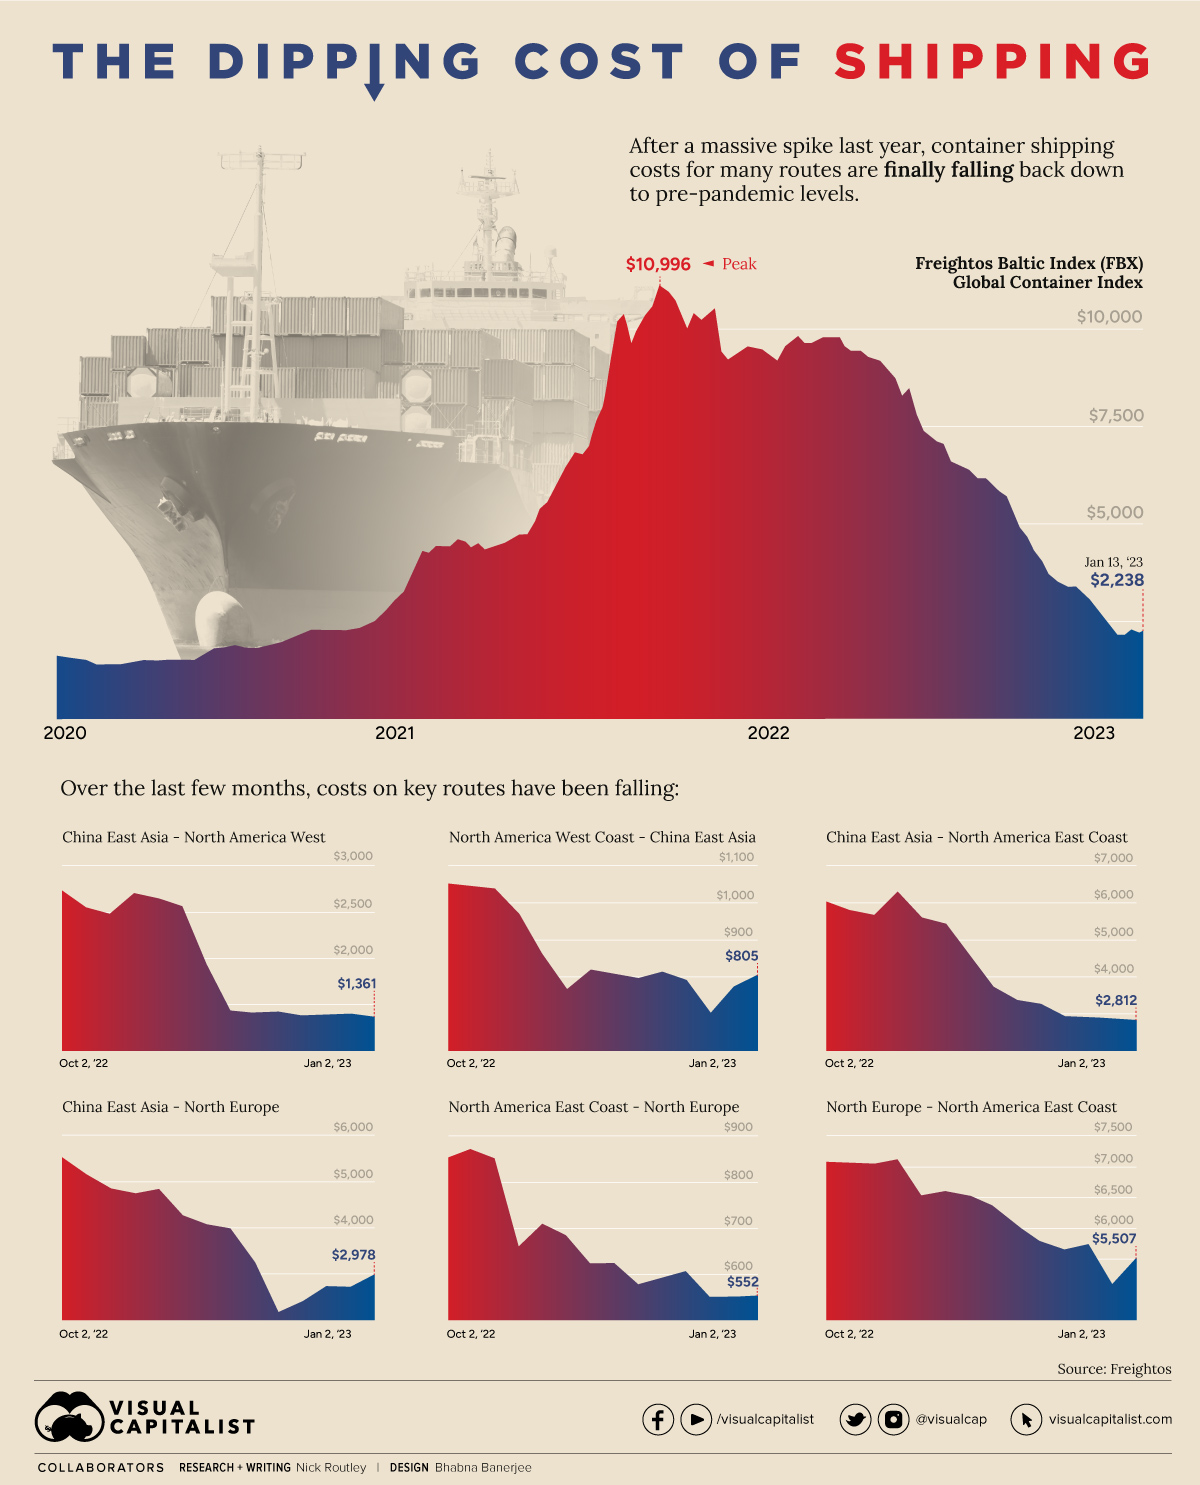 https://www.visualcapitalist.com/wp-content/uploads/2023/01/The-Dipping-Cost-of-Shipping_MAIN.jpg